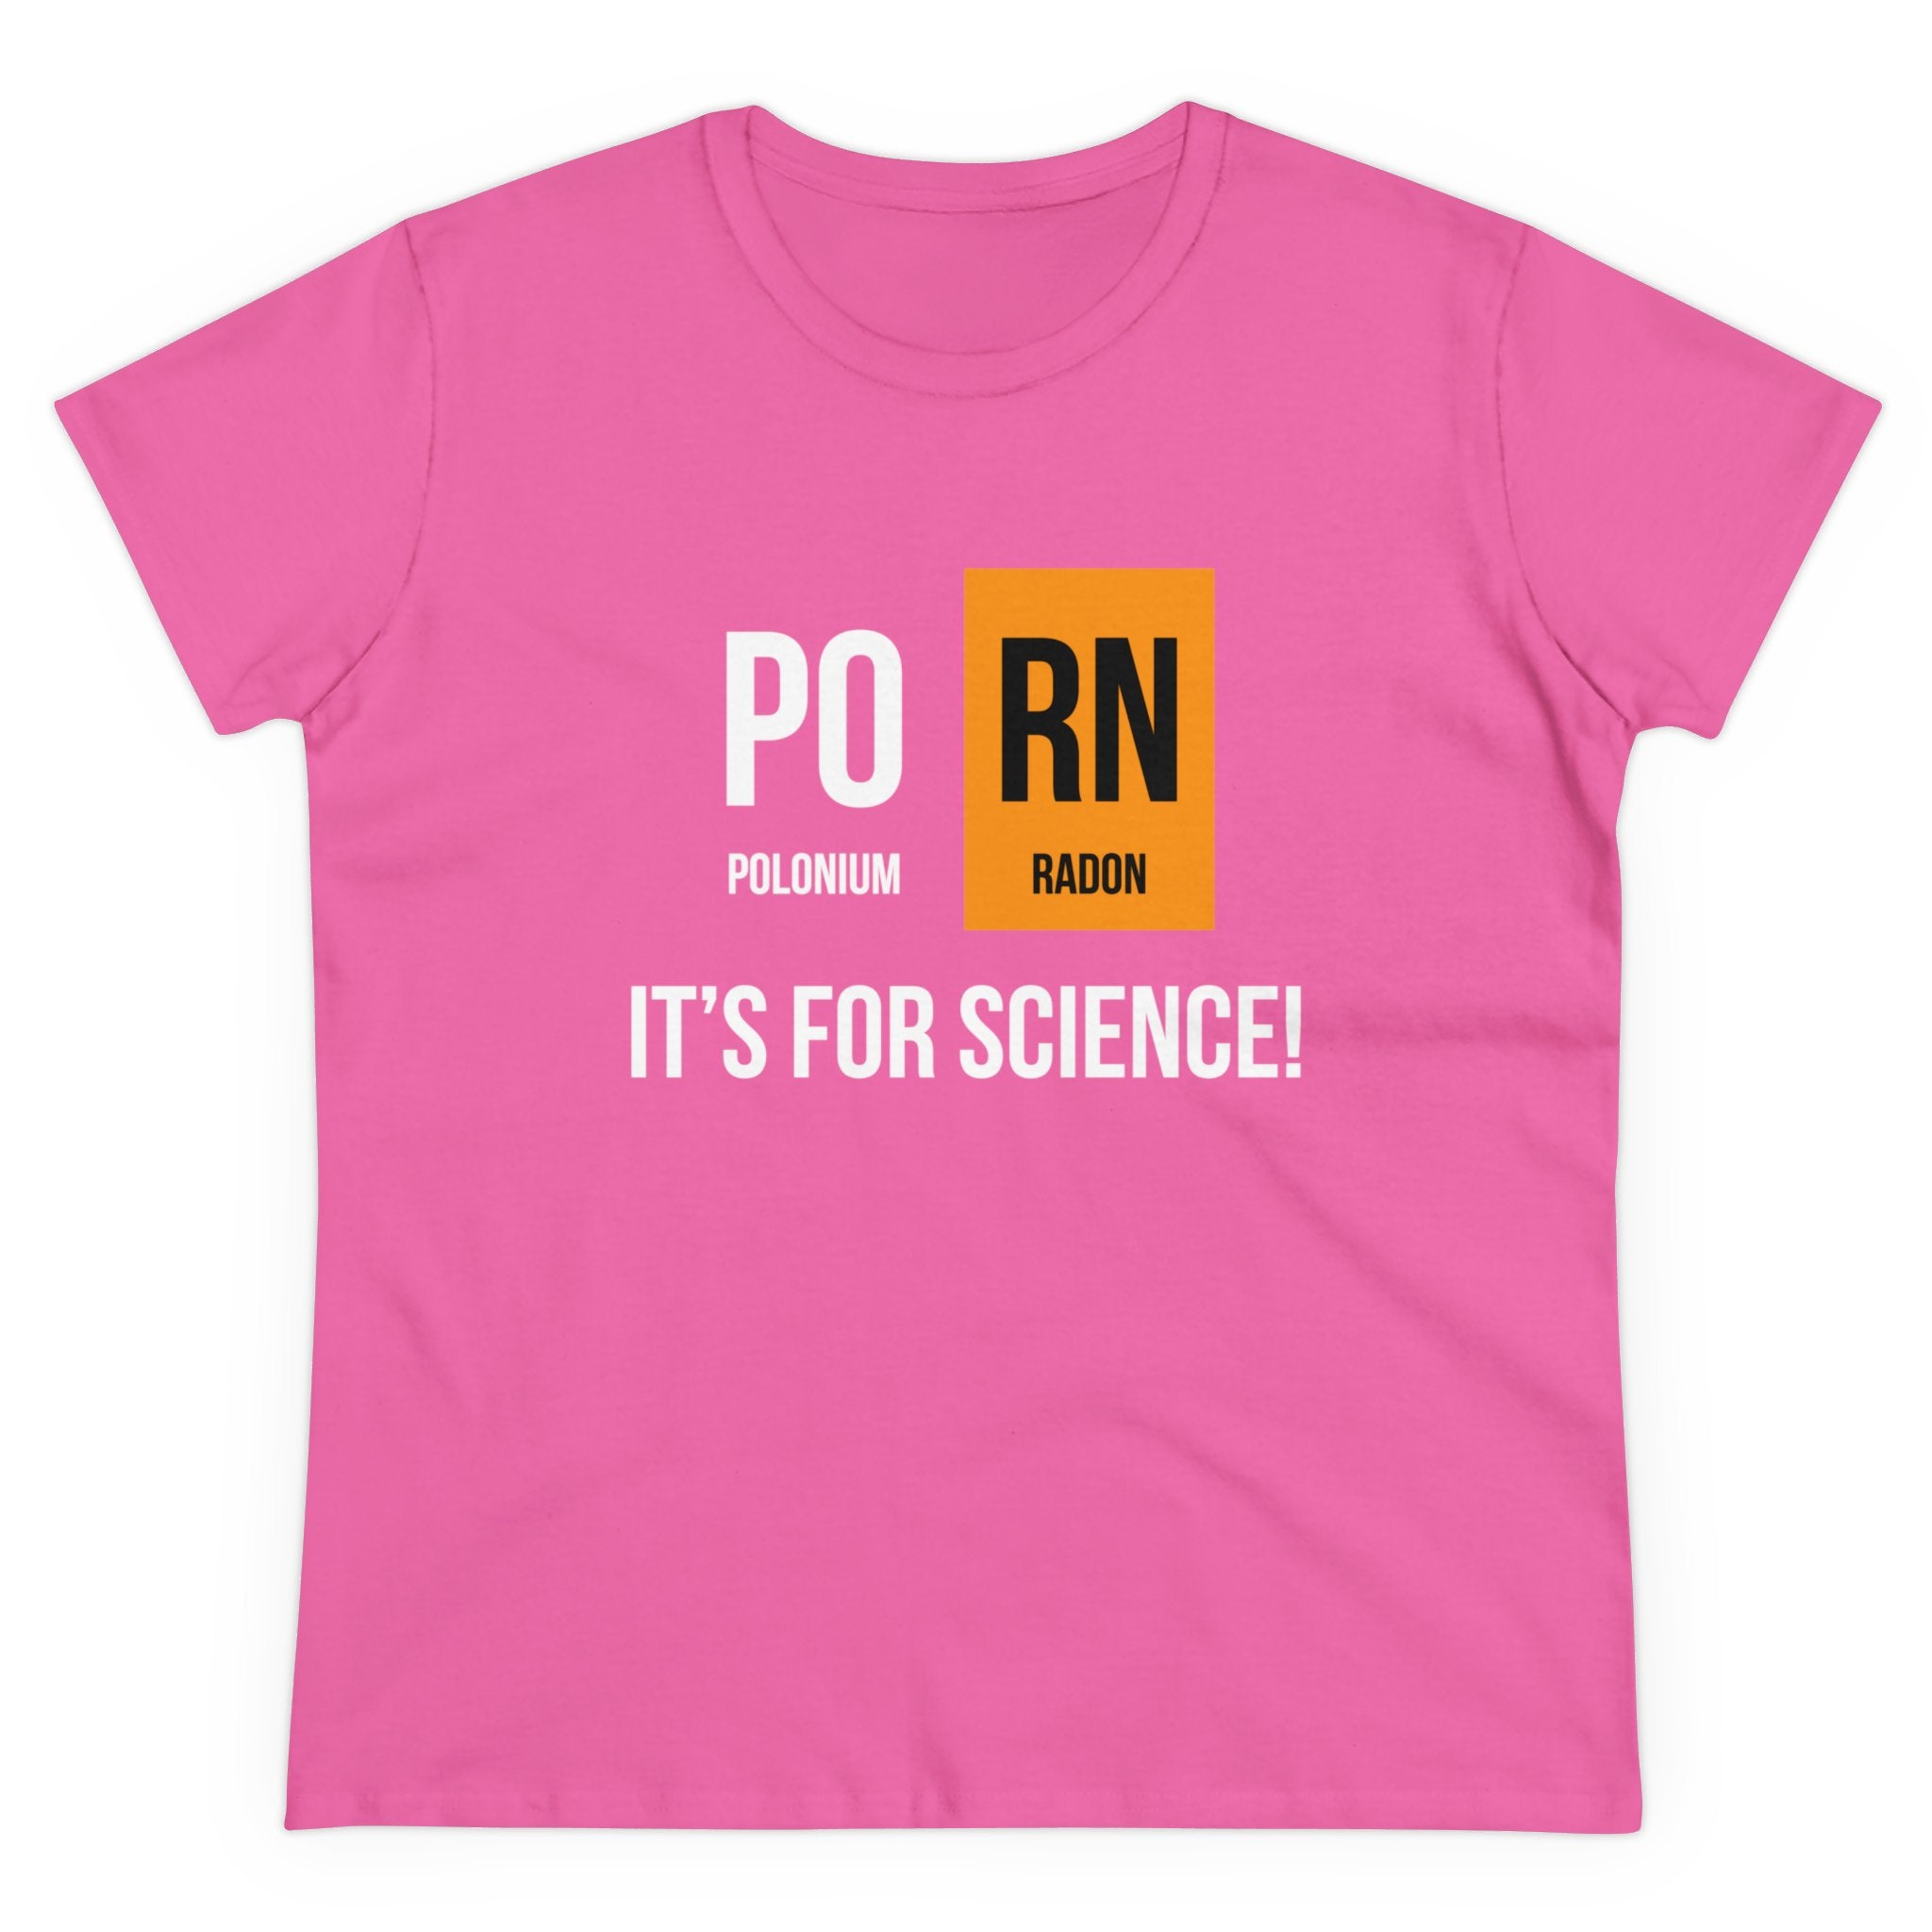 A stylish pink PO-RN - Women's Tee made of soft cotton displays the text "POLONIUM" and "RADON" with their chemical symbols "Po" and "Rn," spelling "PORN," and the phrase "IT'S FOR SCIENCE!" written below.